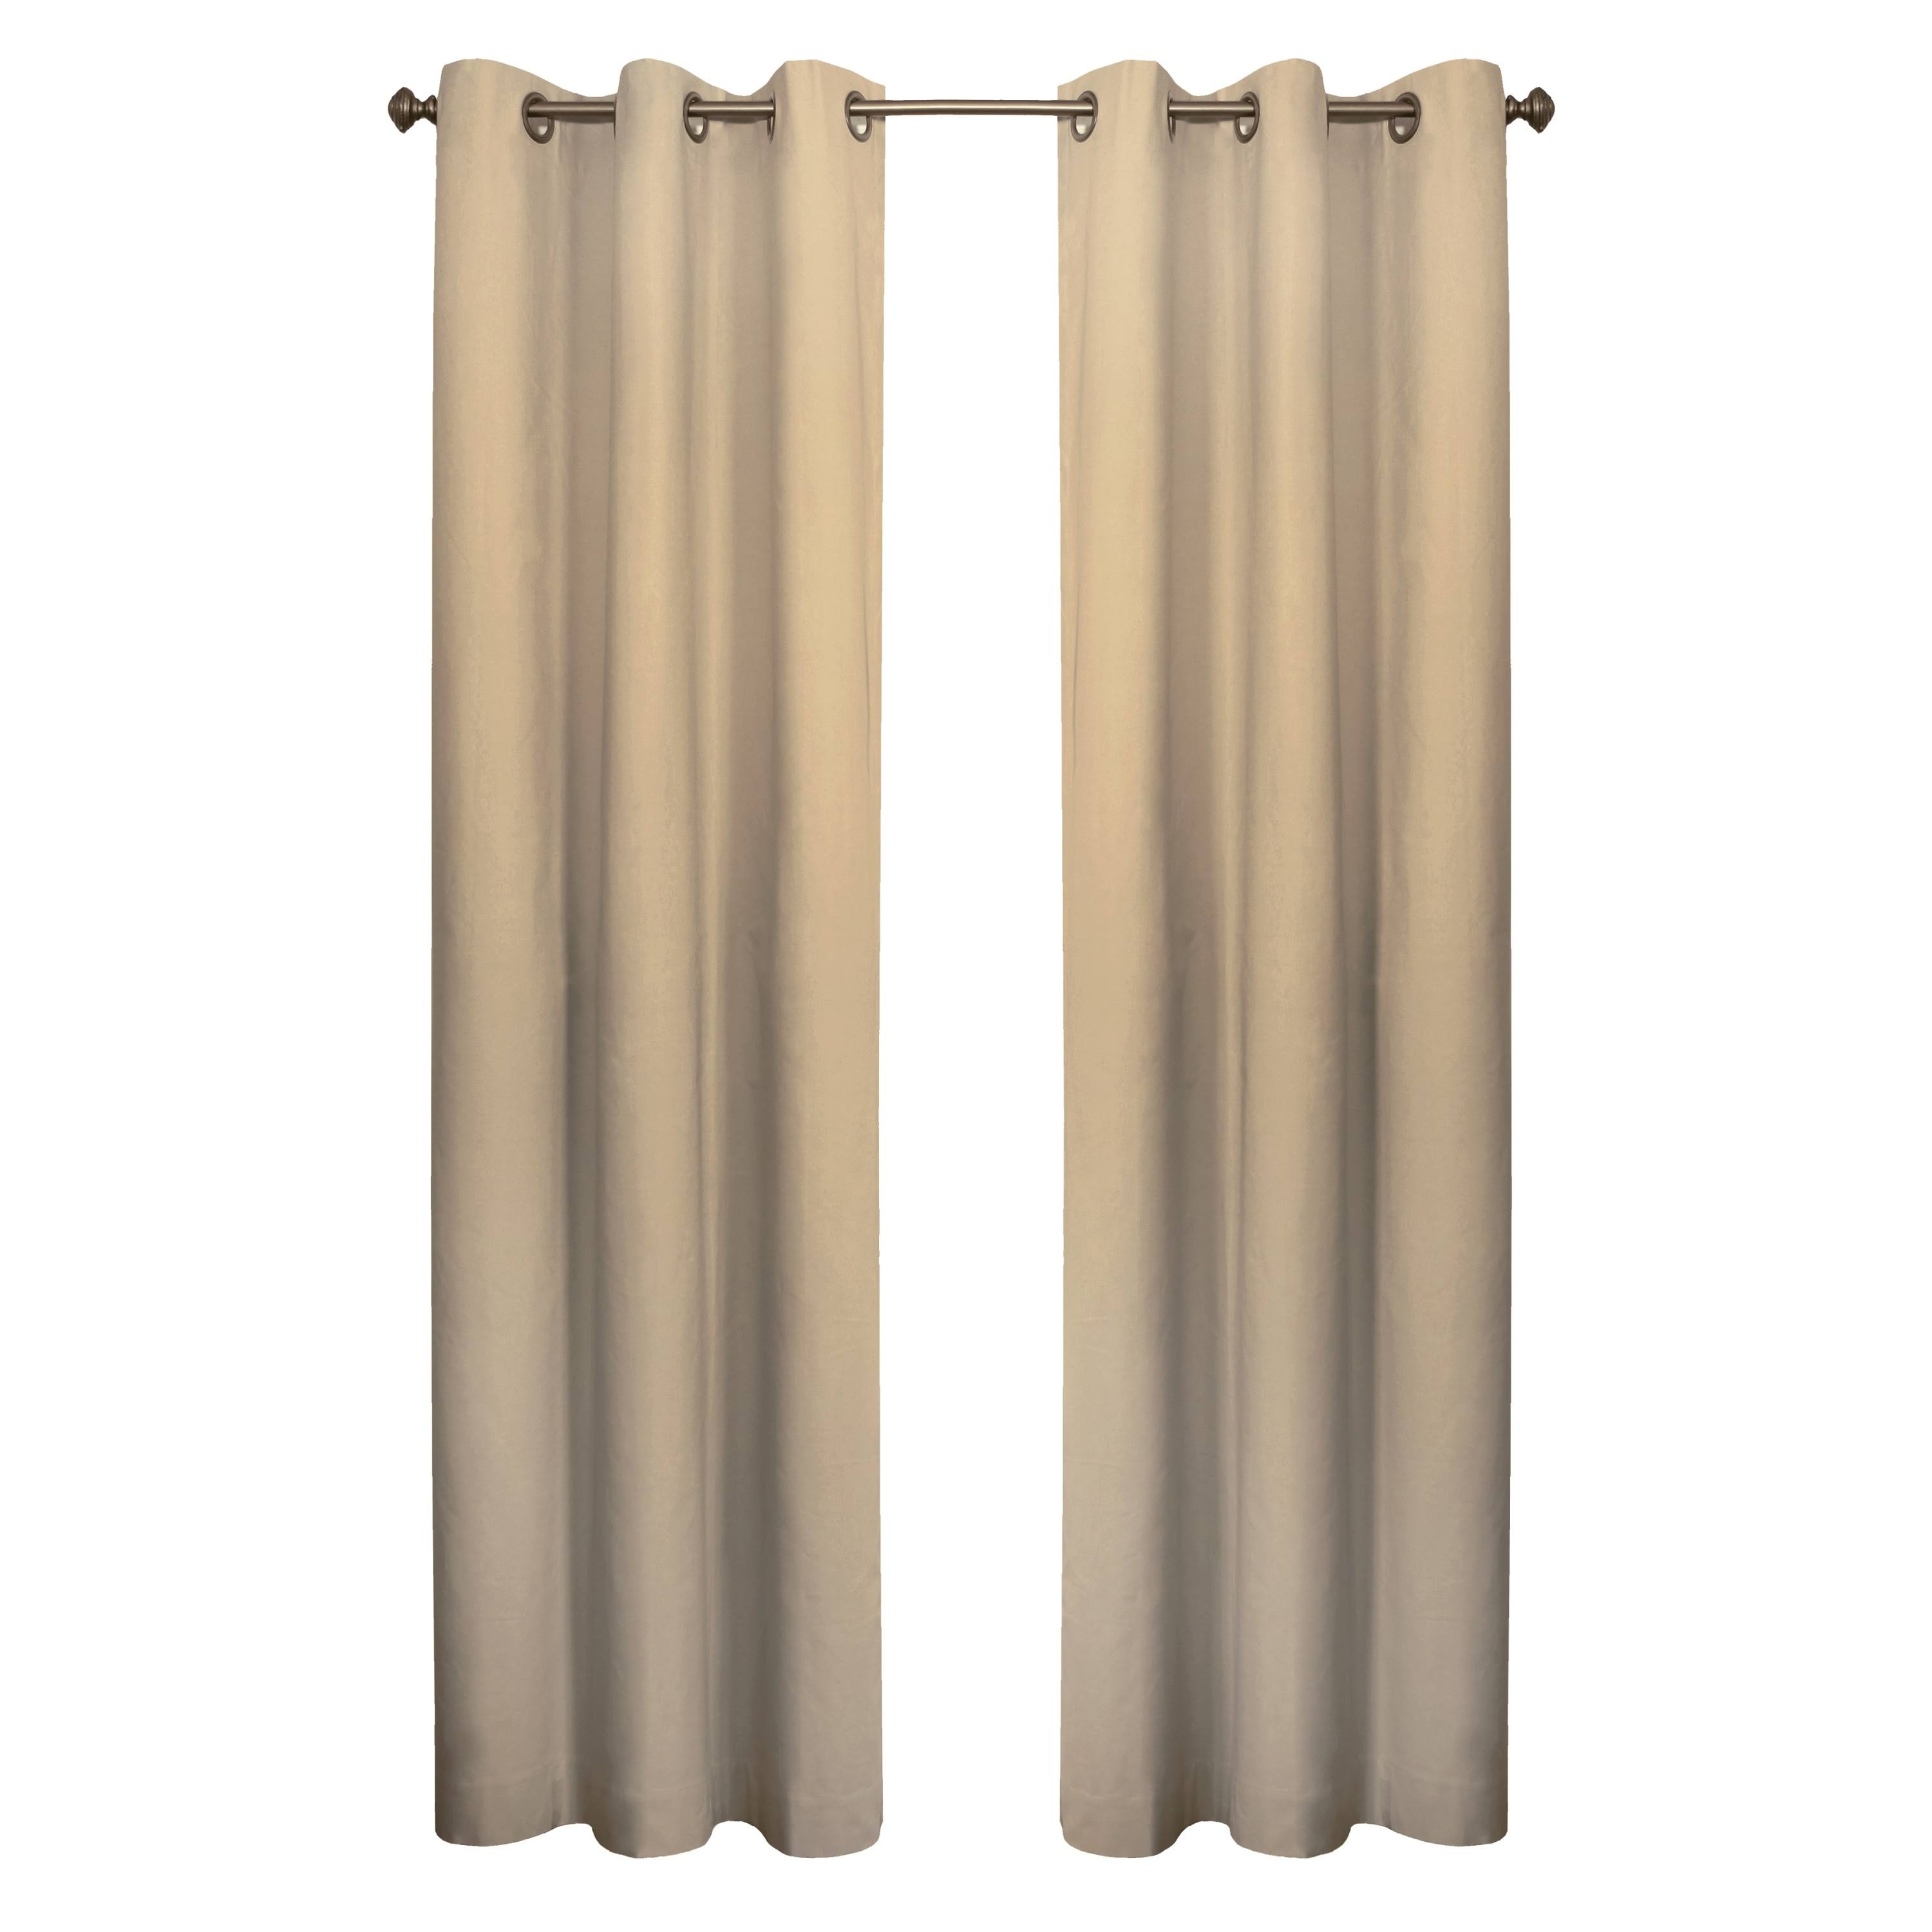 Commonwealth Home Fashions Weathermate Insulated Grommet Curtain Panel